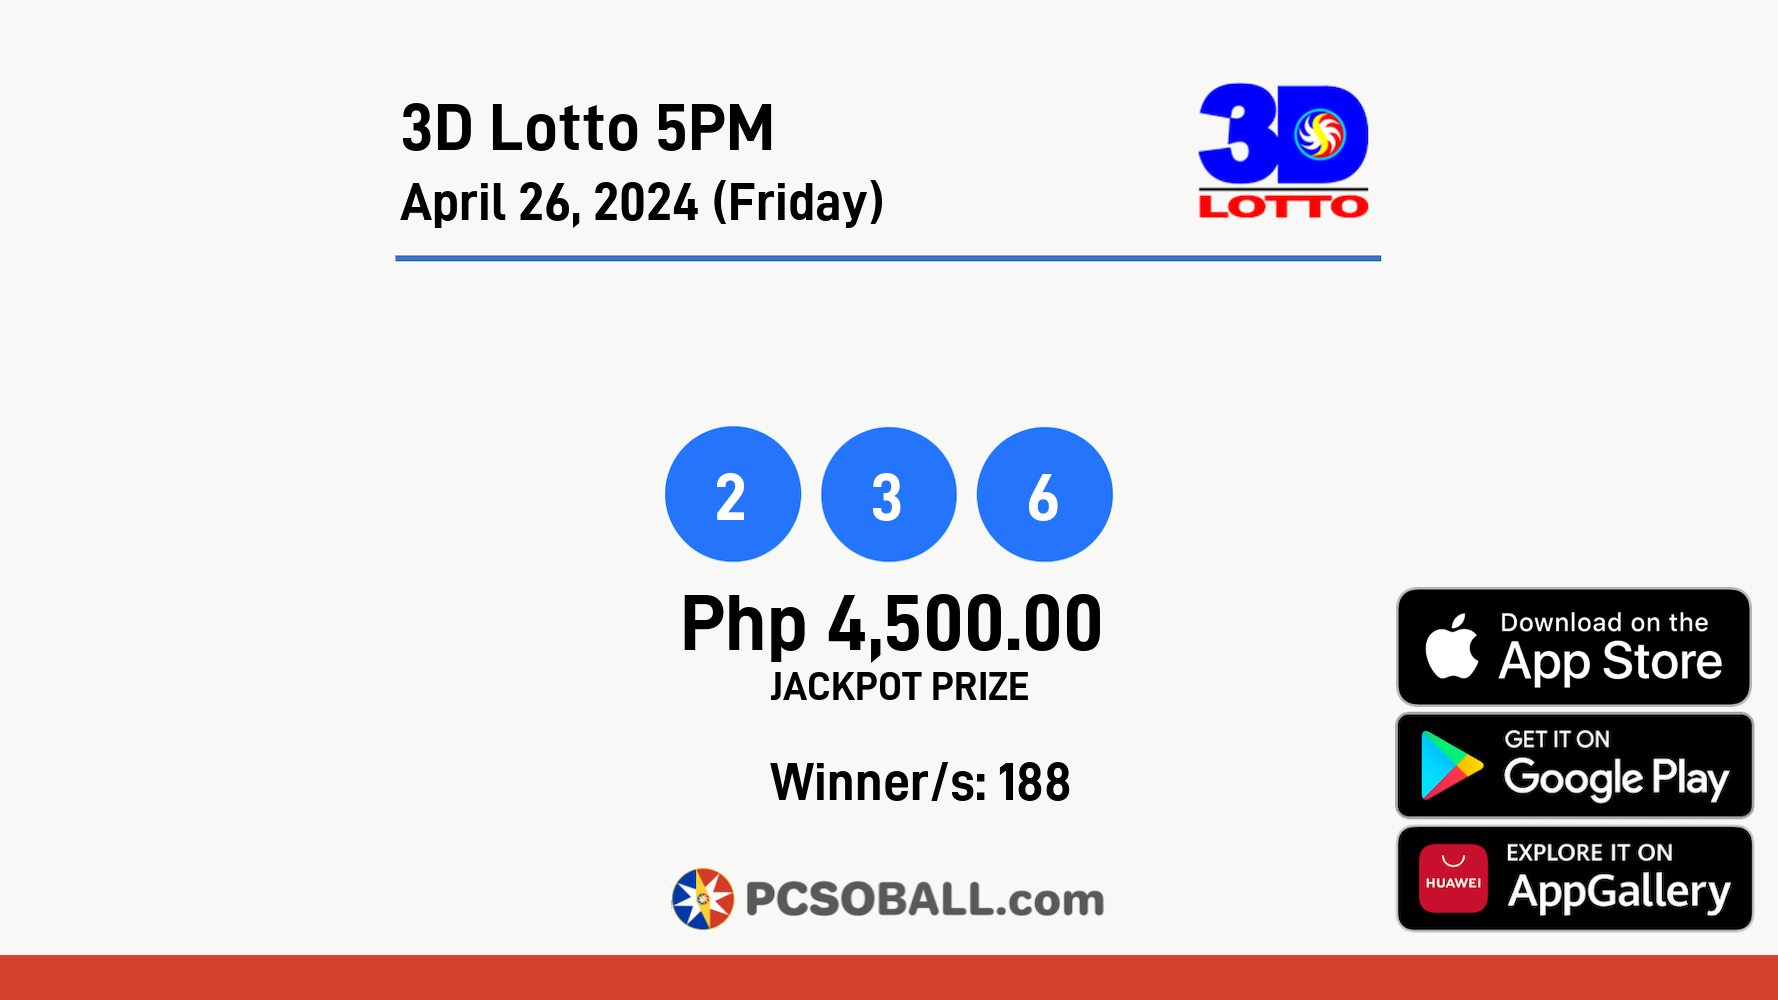 3D Lotto 5PM April 26, 2024 (Friday) Result